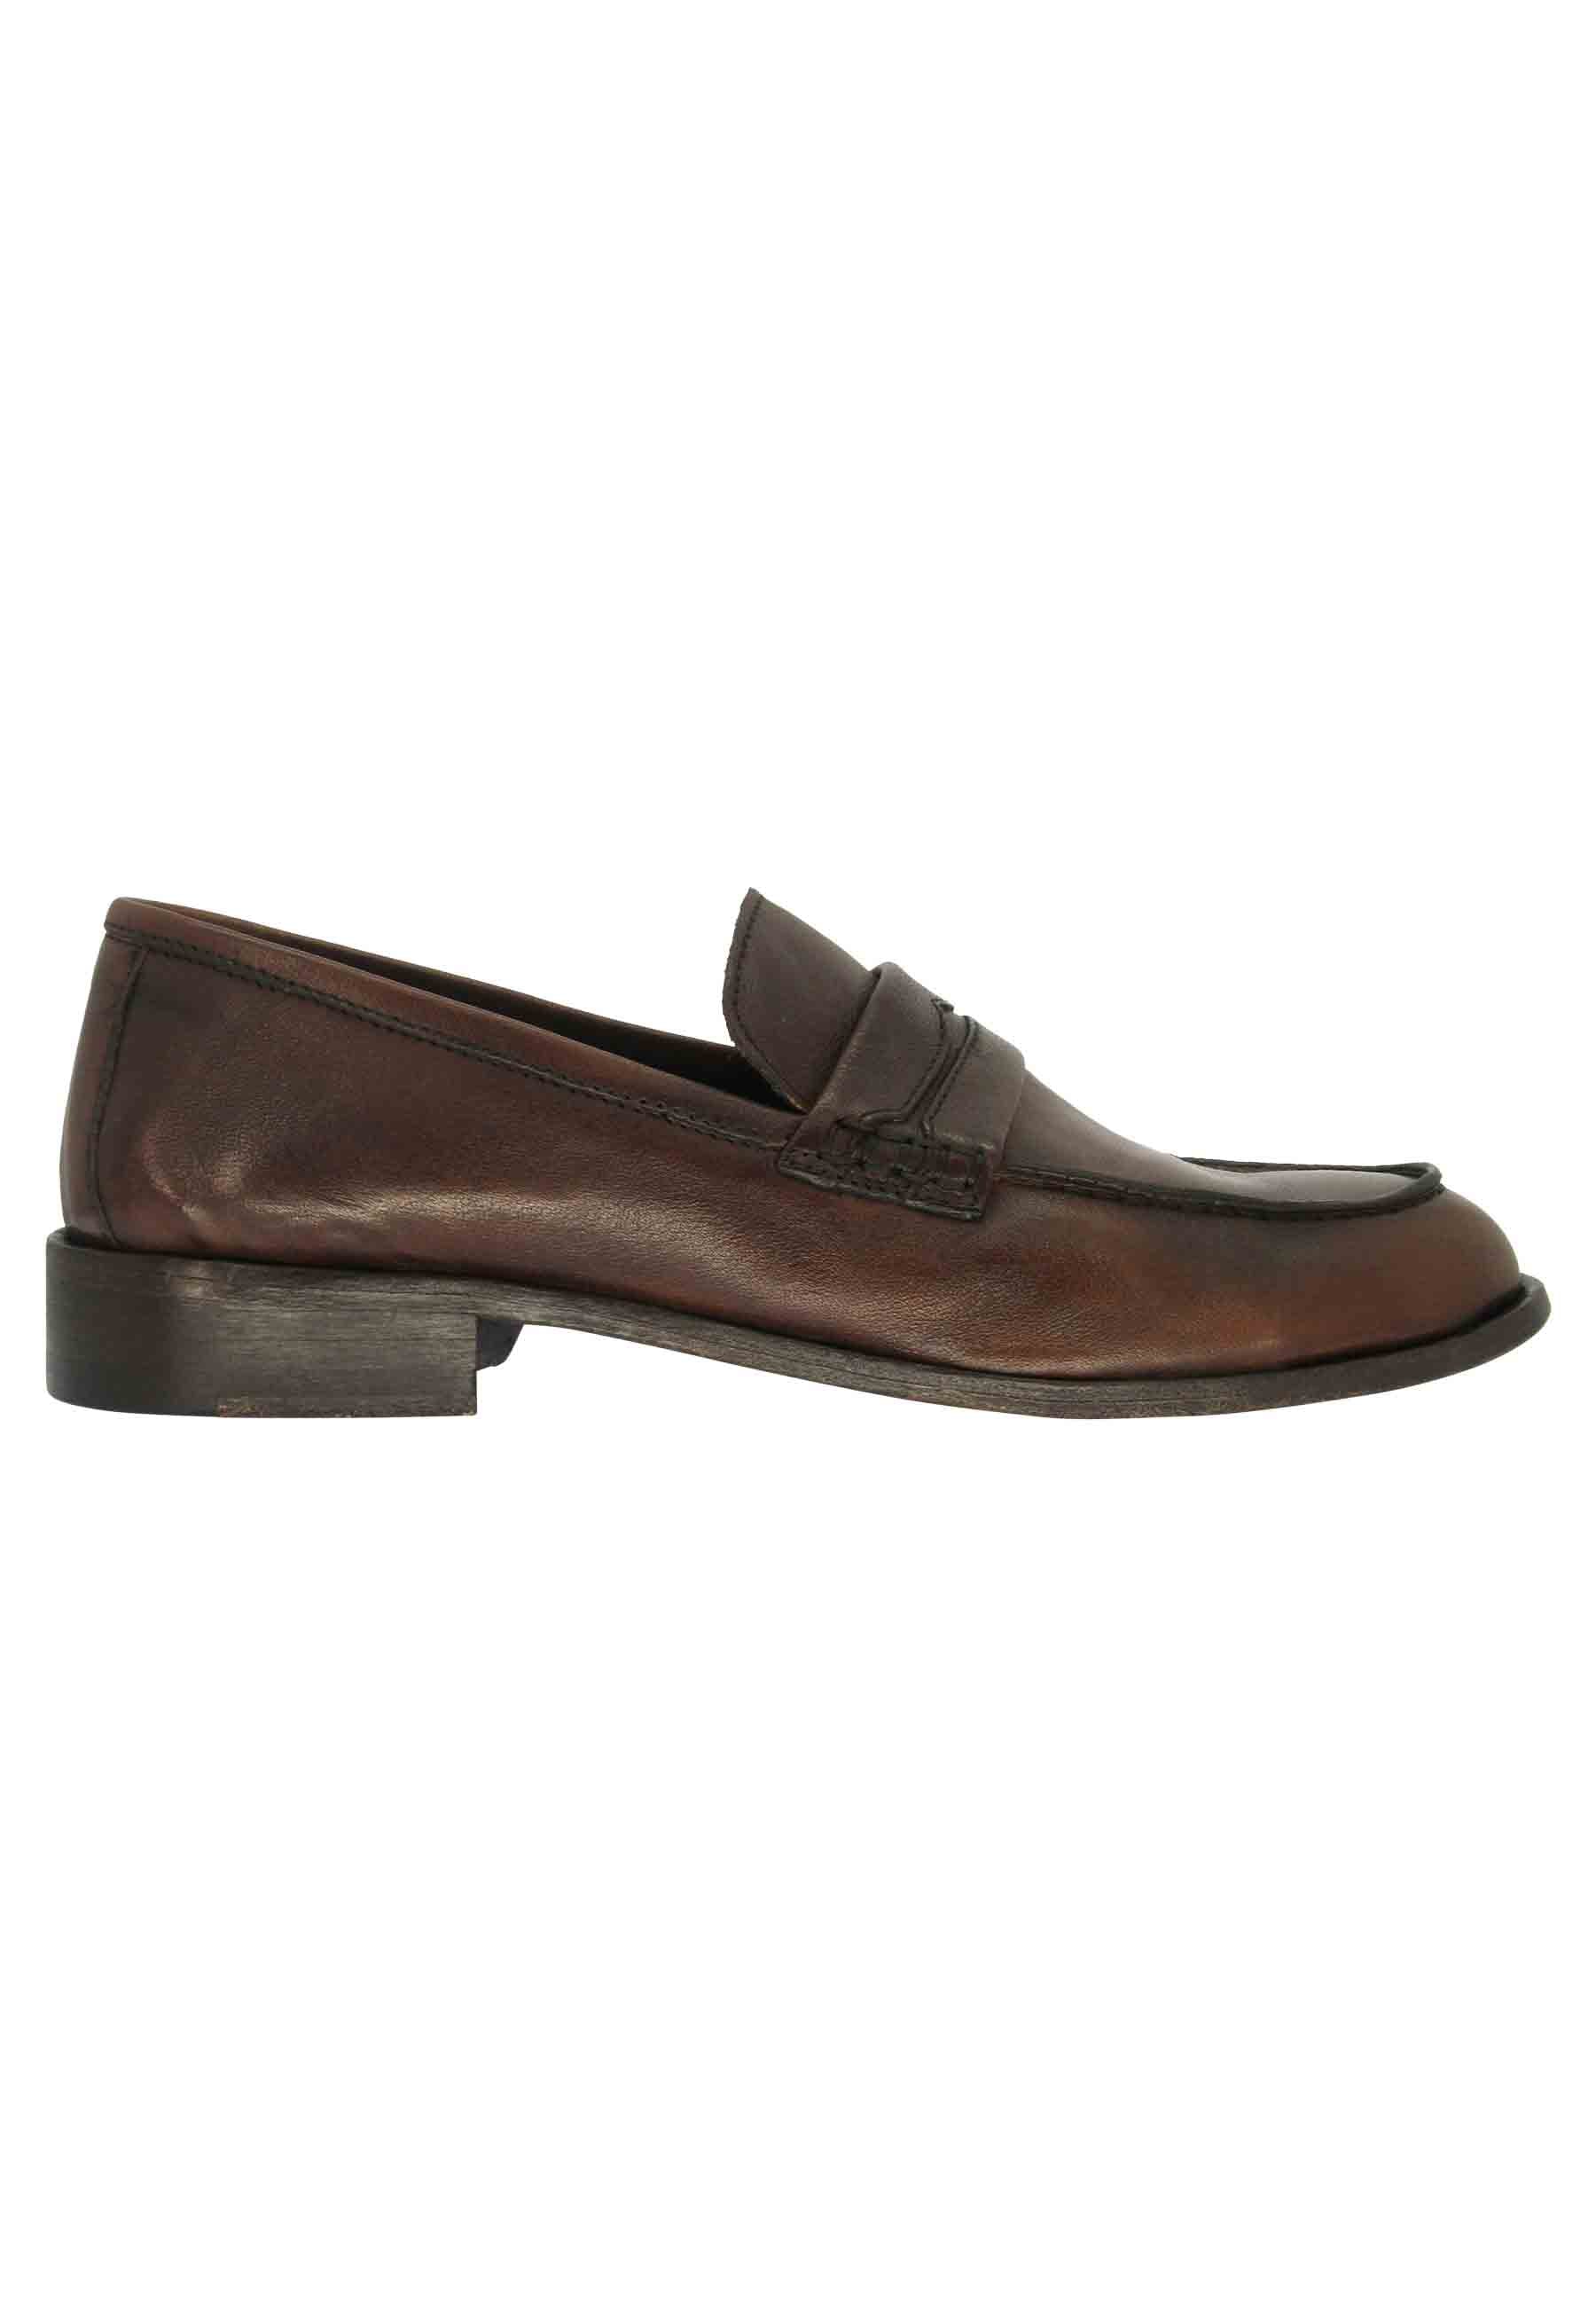 Men's brown leather moccasins with stitched leather sole